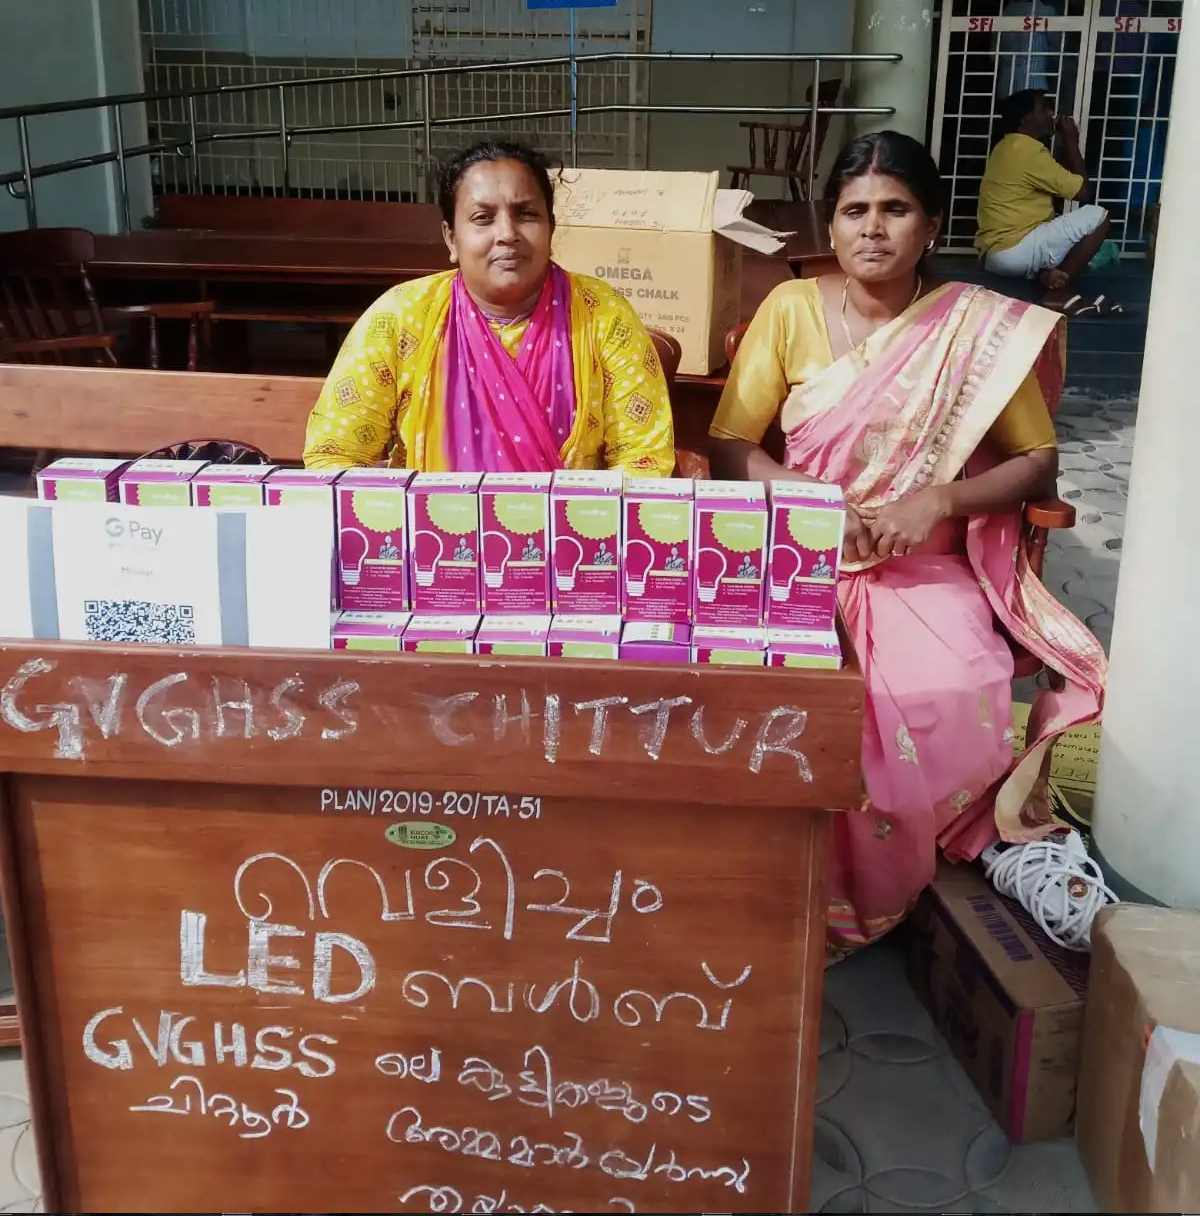 Sales exhibit for Virangana LED lights units at Chittur Government College